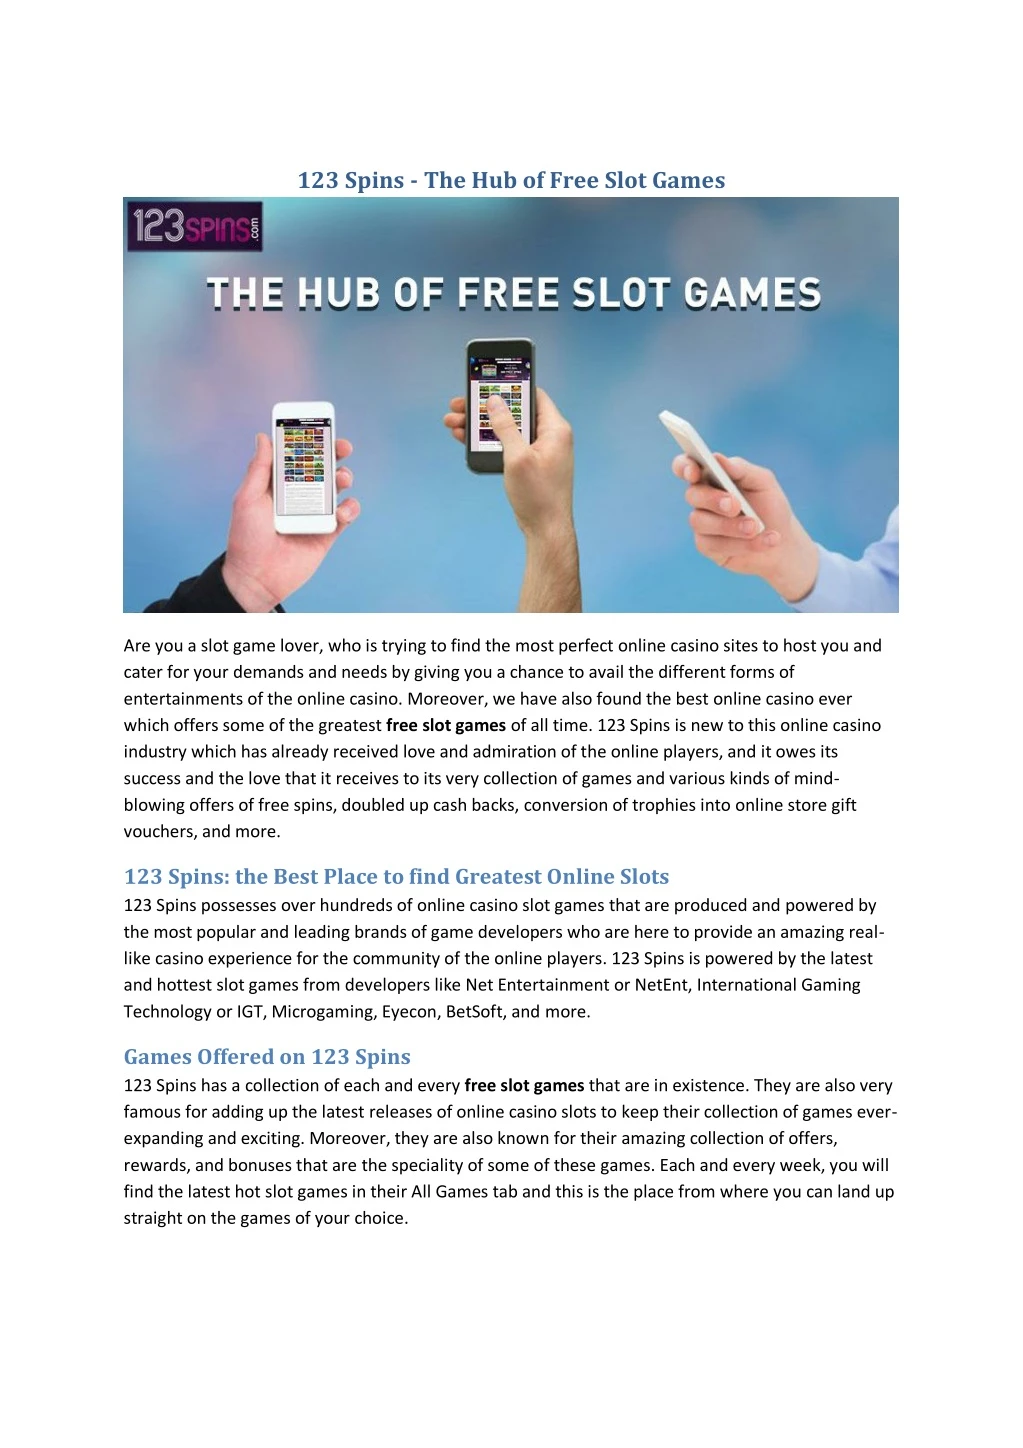 123 spins the hub of free slot games